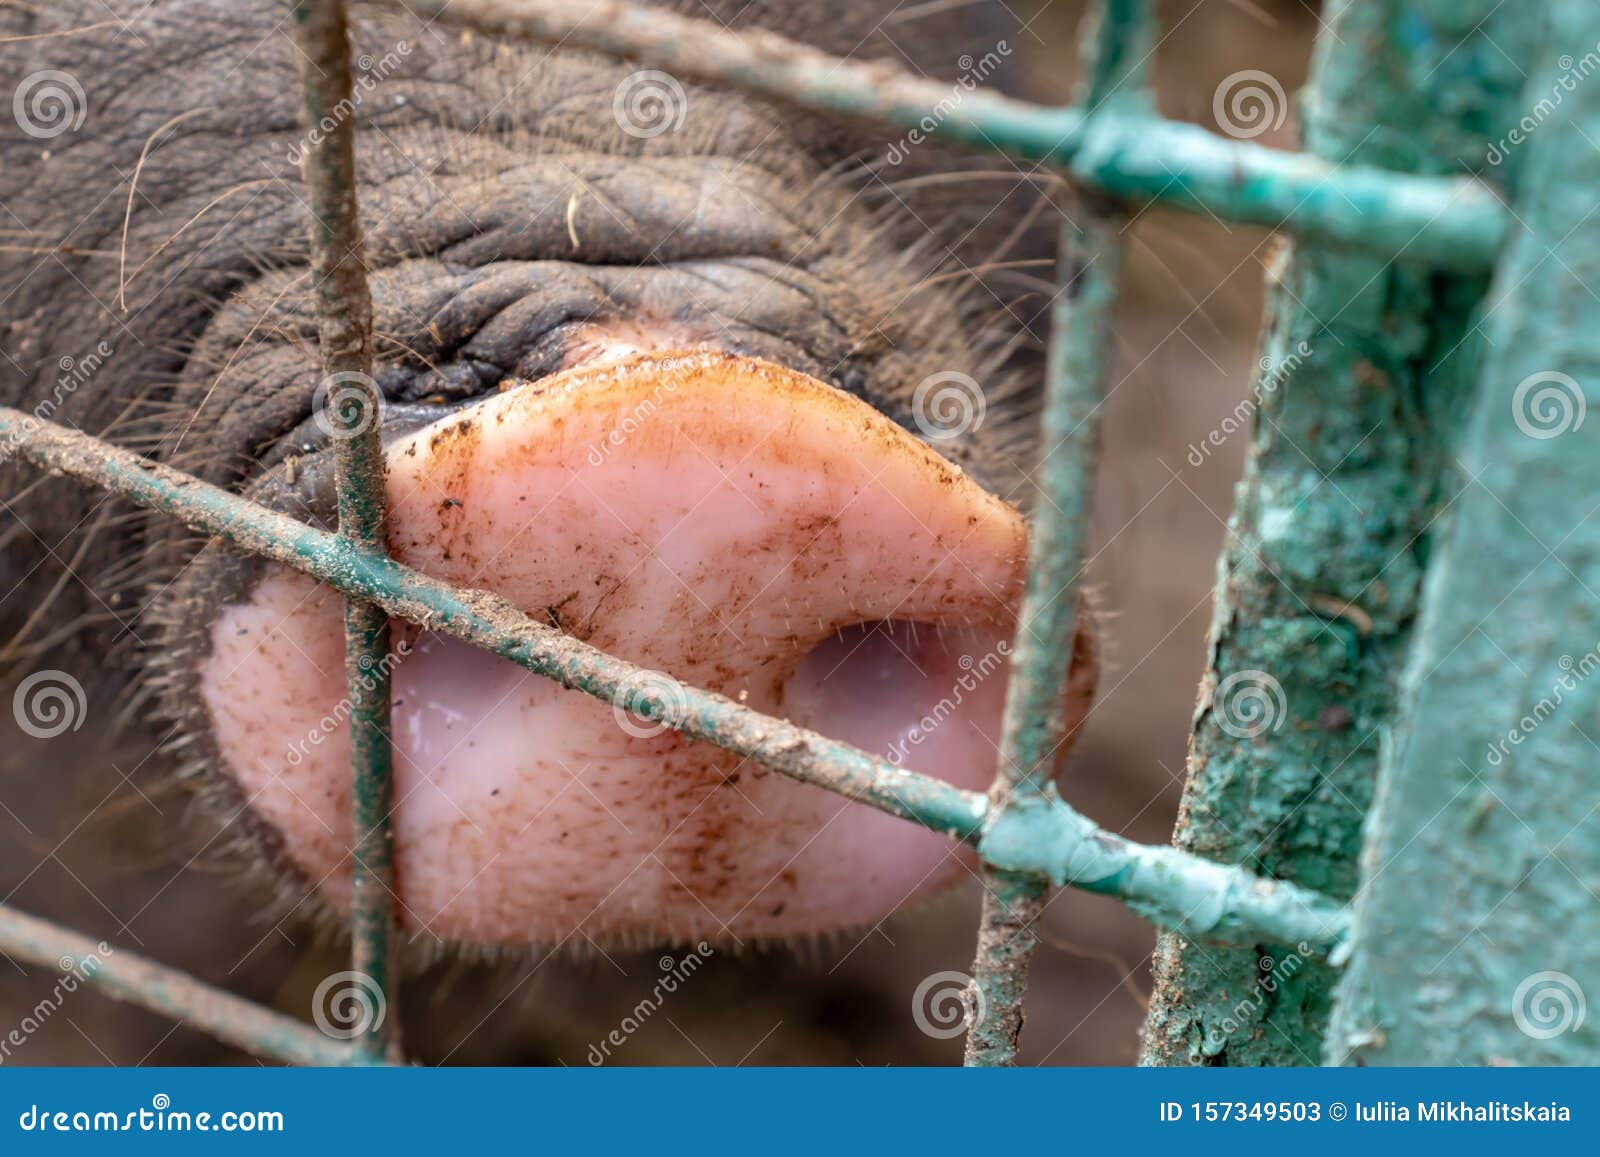 Dirty Pig Snout Nose Behind The Bars Of A Pigsty Close Up Stock Image